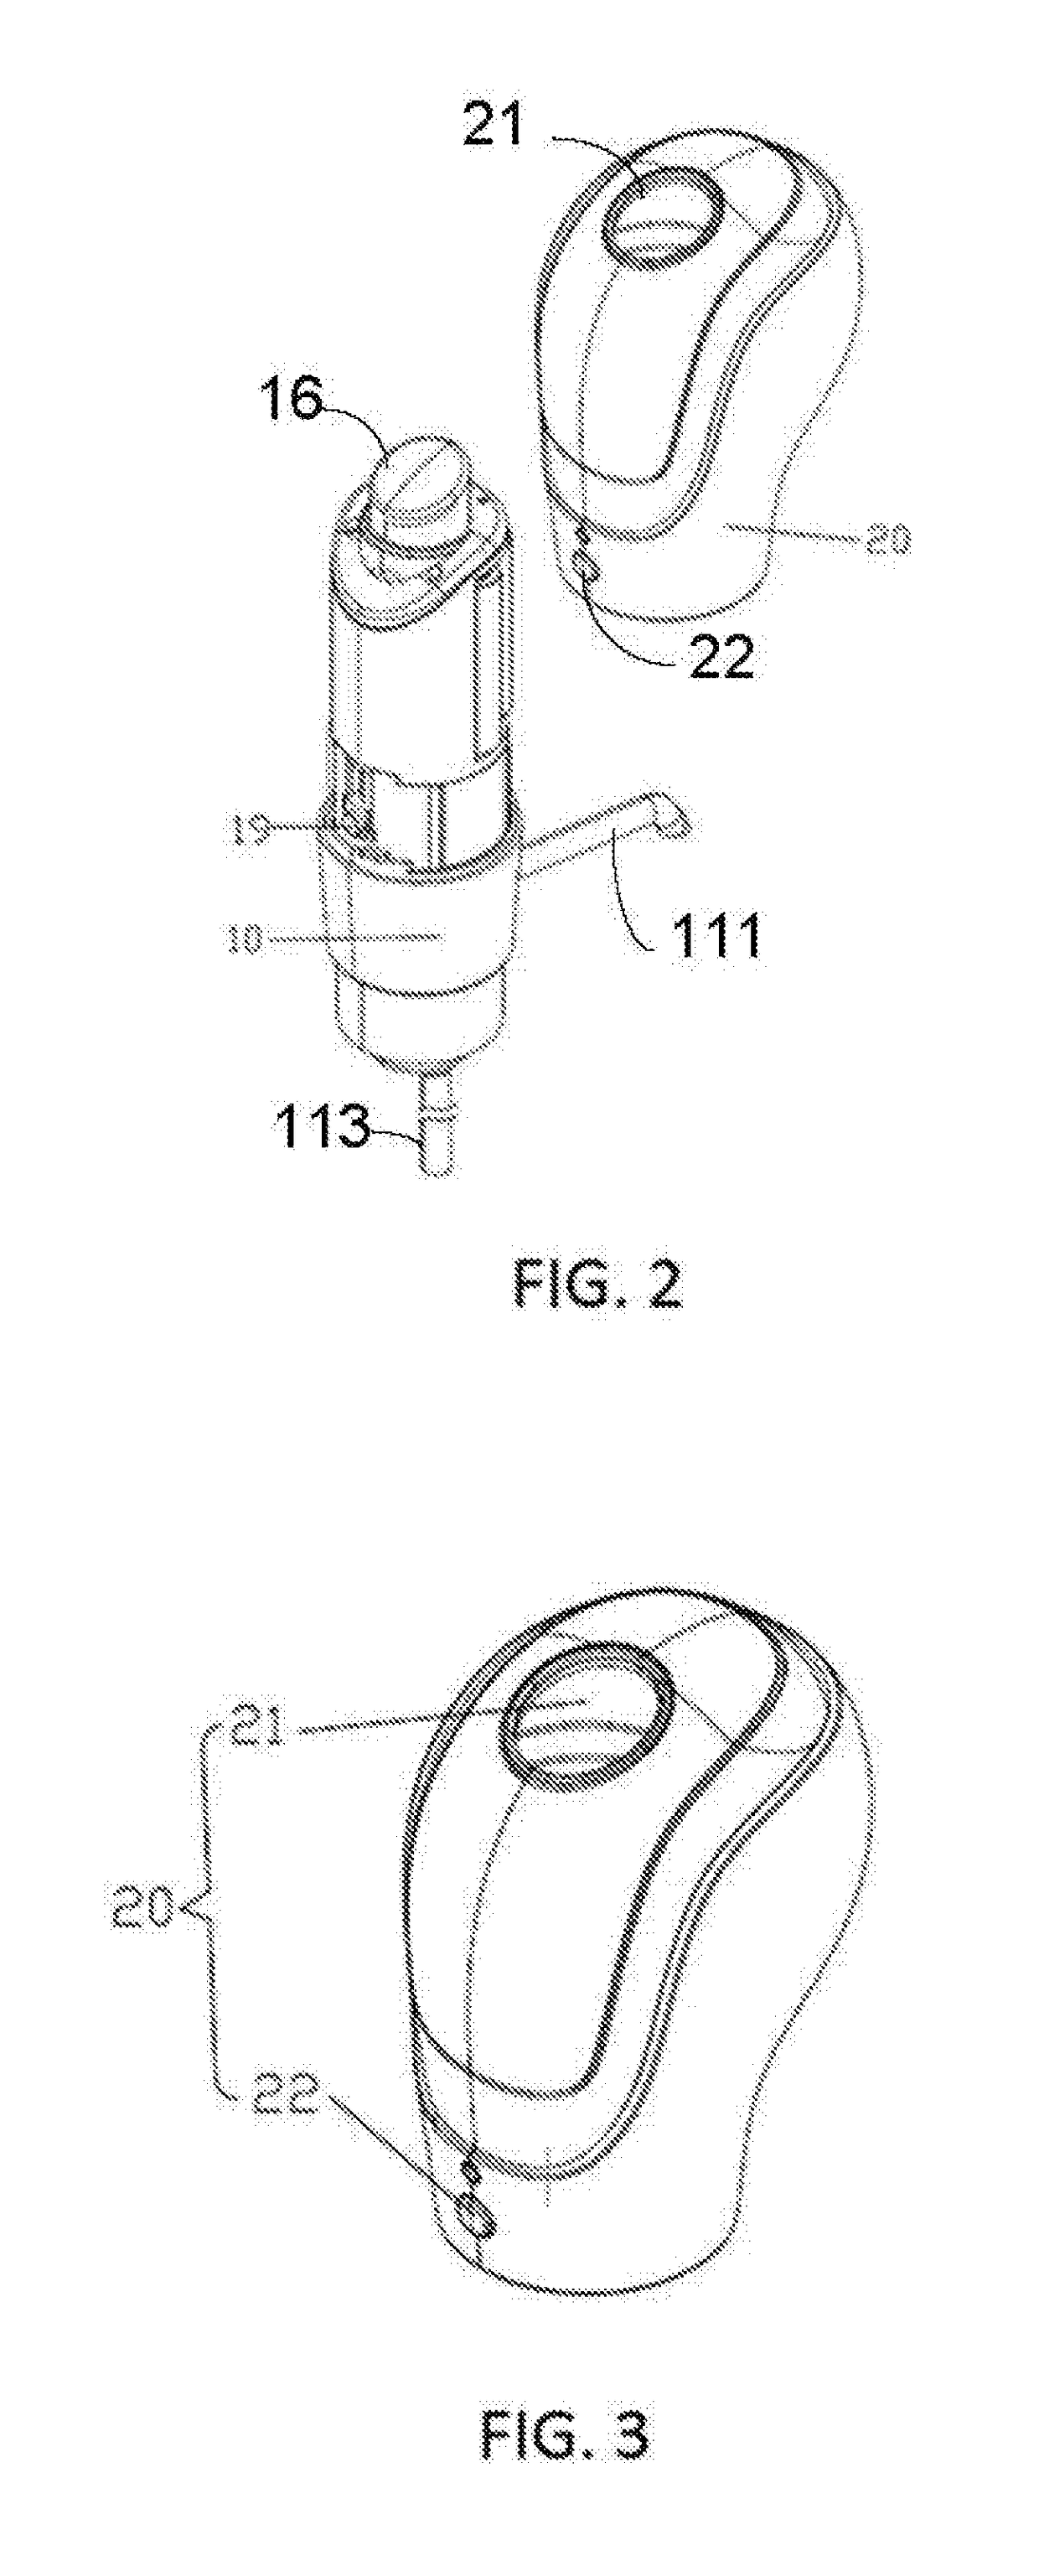 Pressurized decanting device